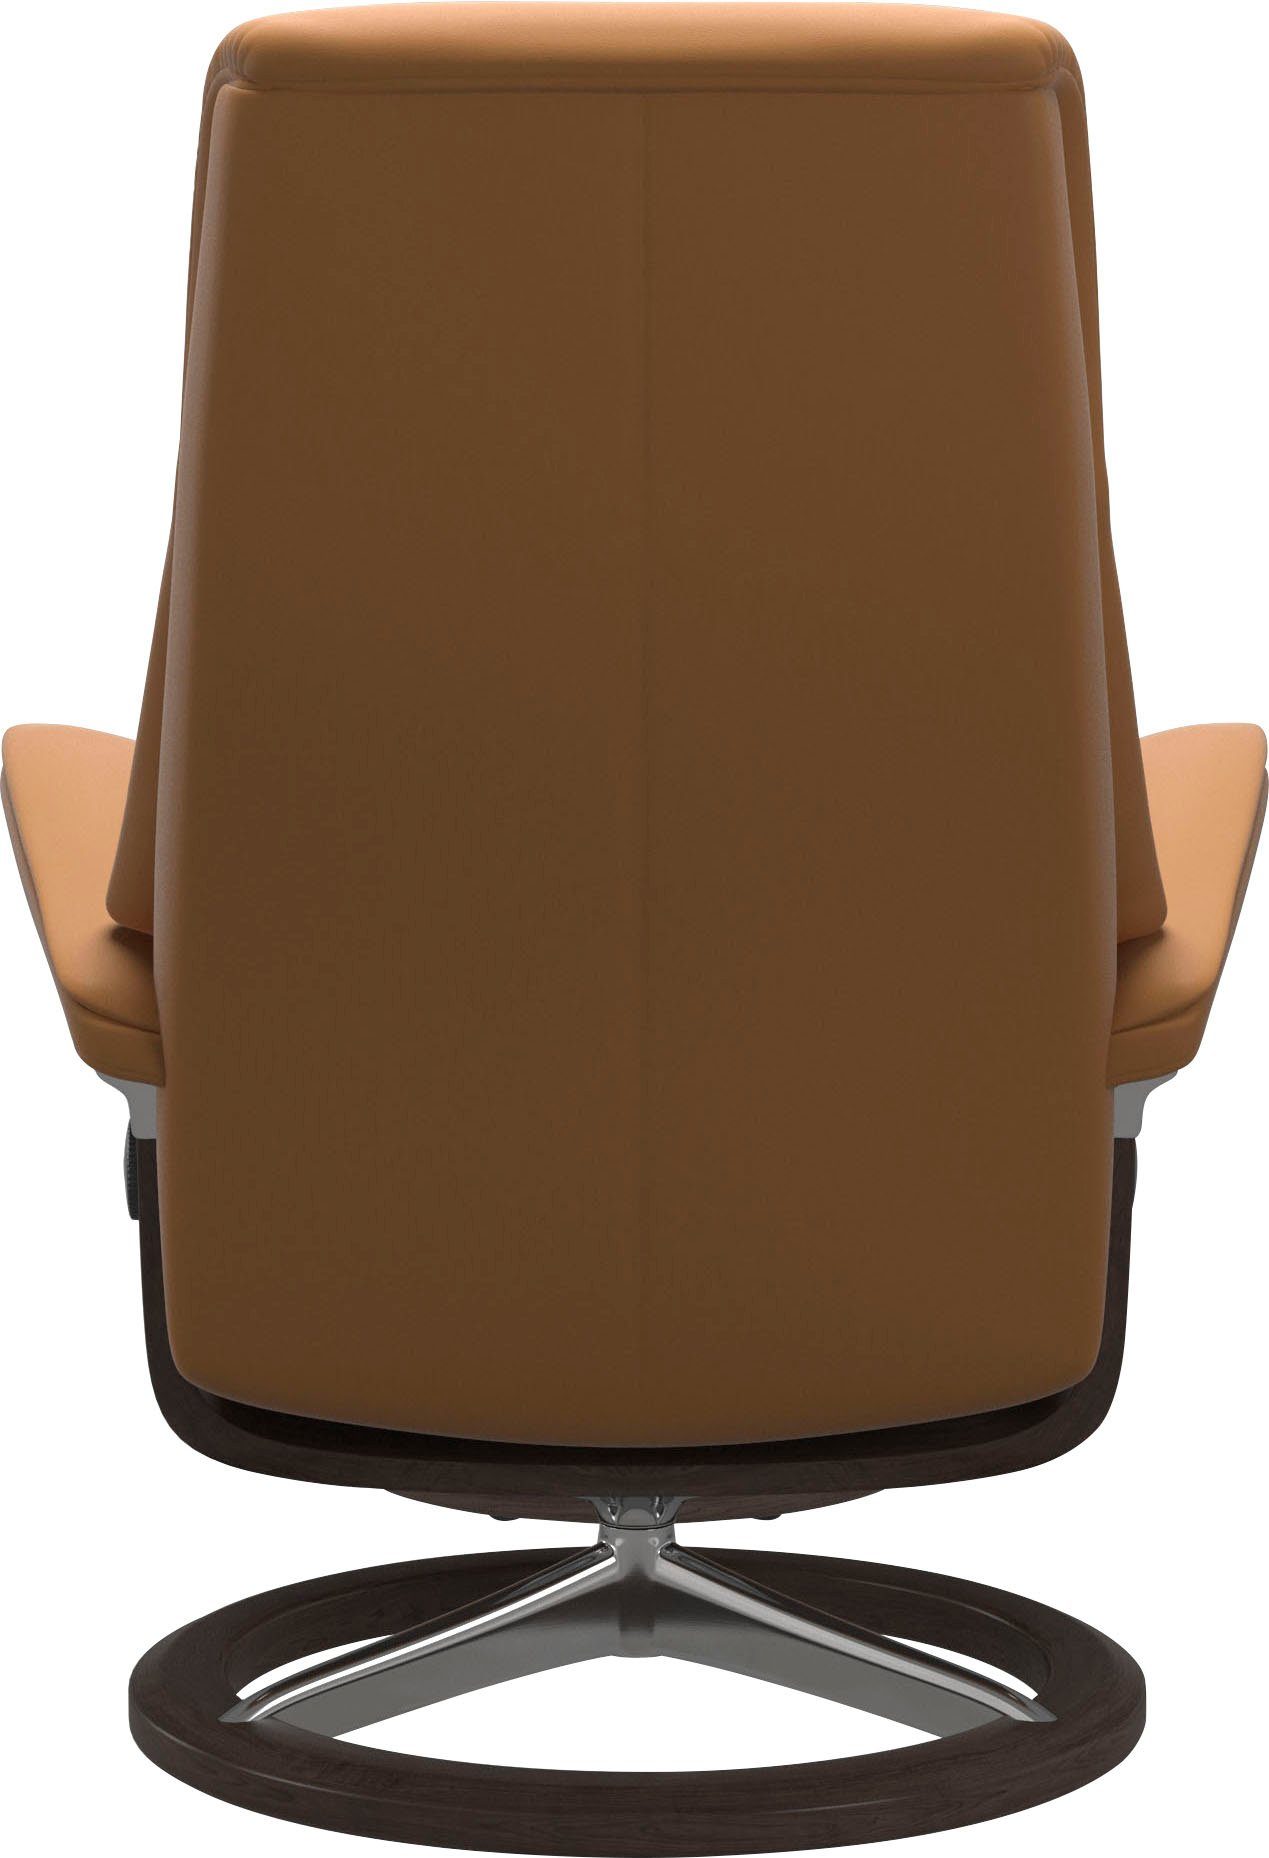 Stressless® Wenge View, Base, Relaxsessel S,Gestell Größe mit Signature